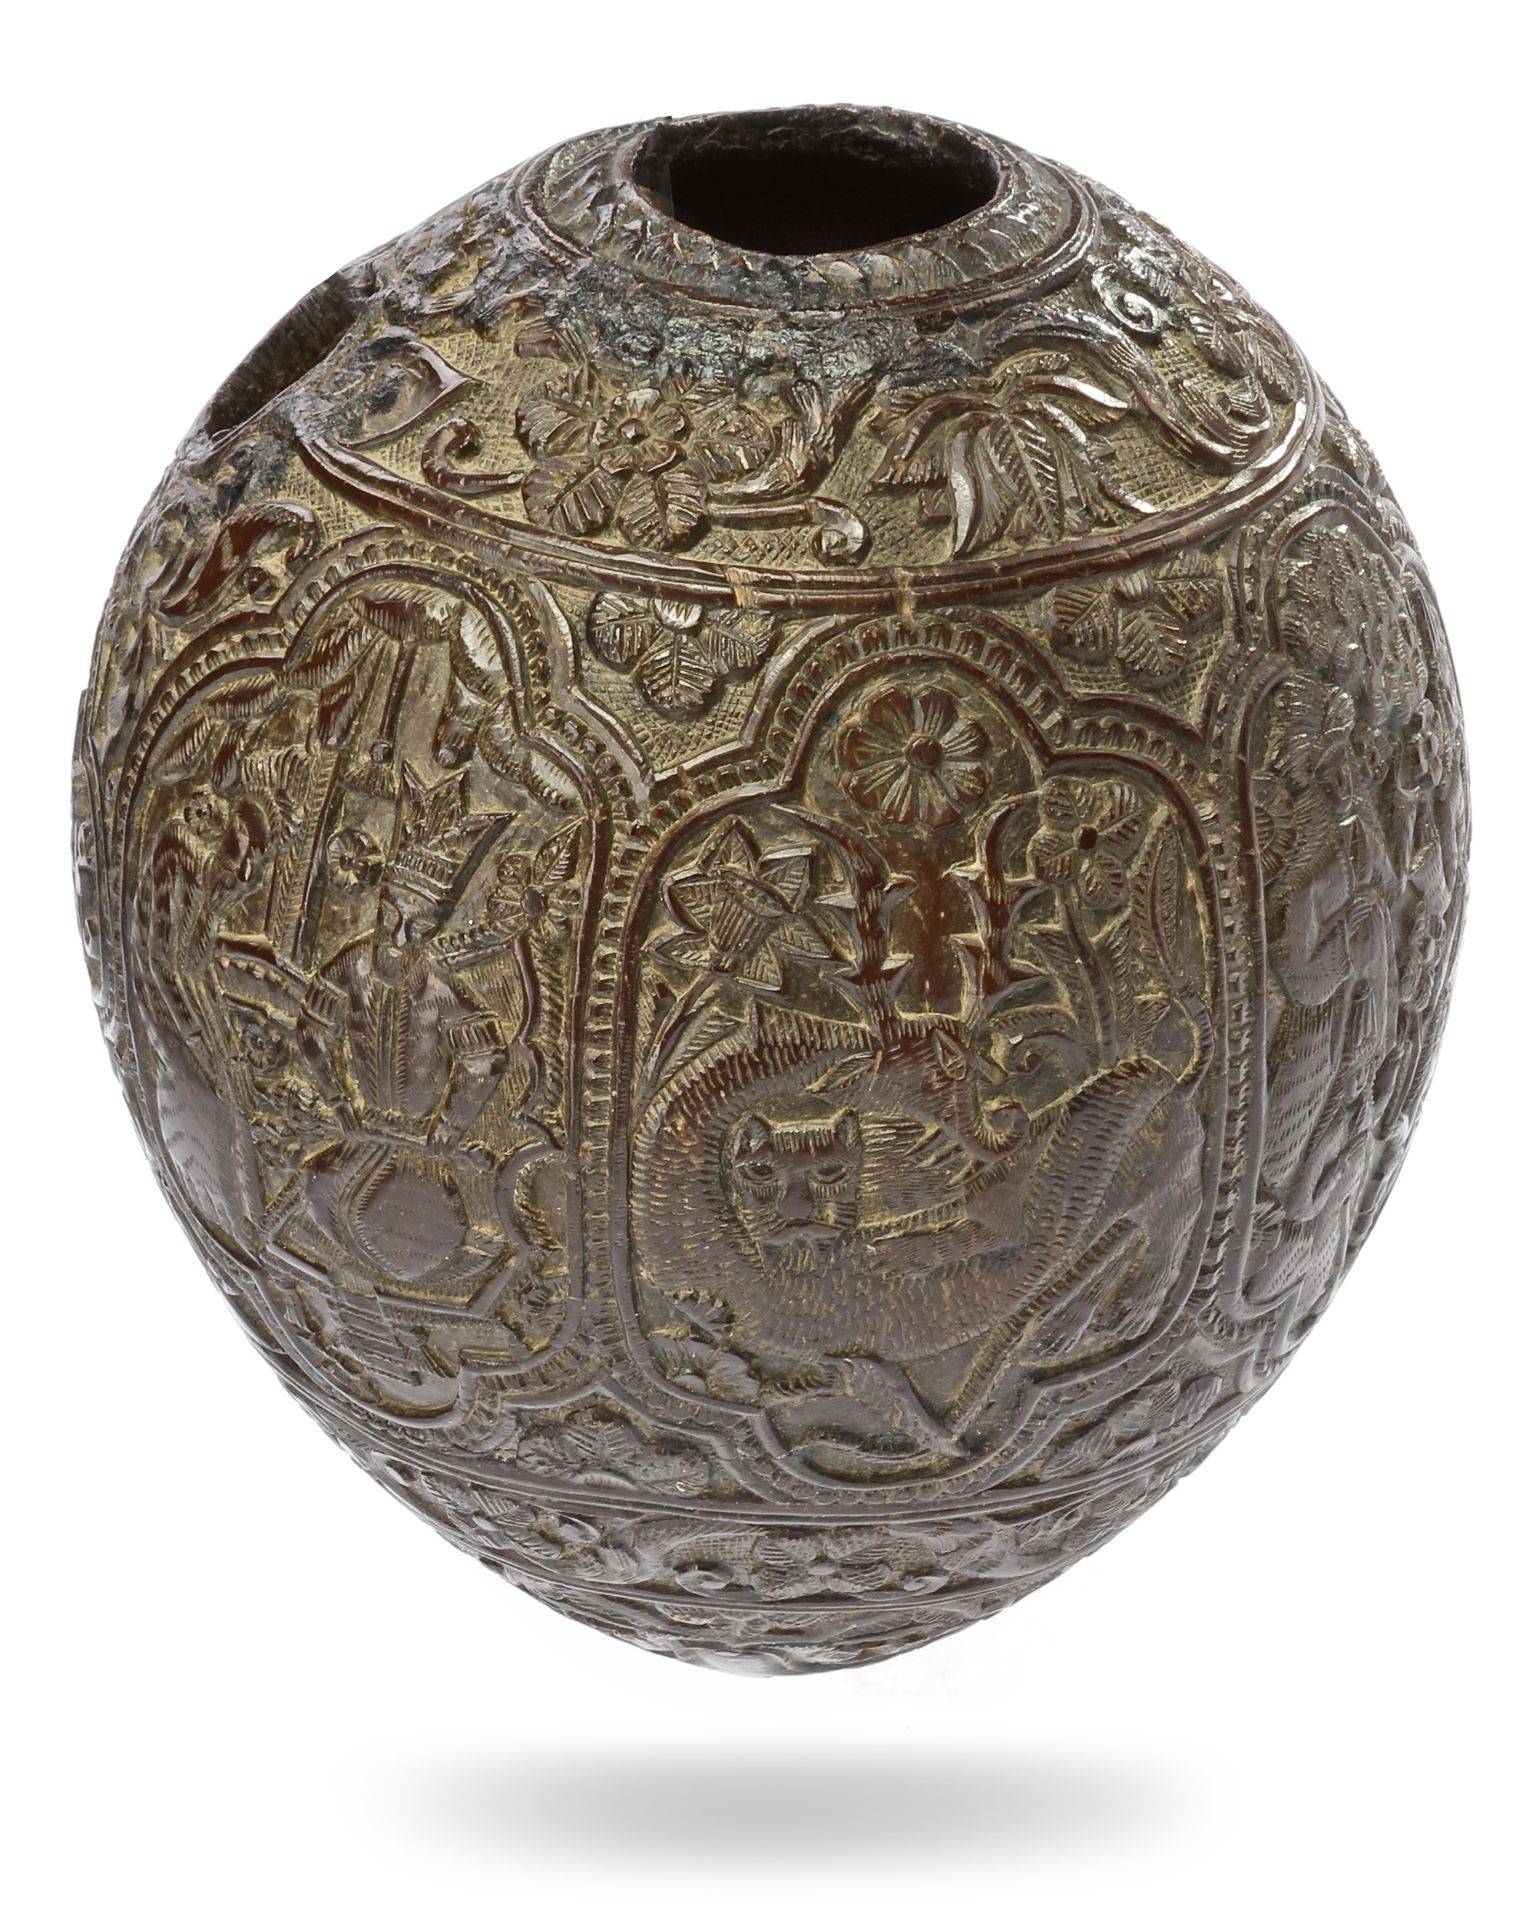 A QAJAR CARVED COCONUT HUQQA BASE, PERSIA, EARLY 19TH CENTURY - Image 8 of 9